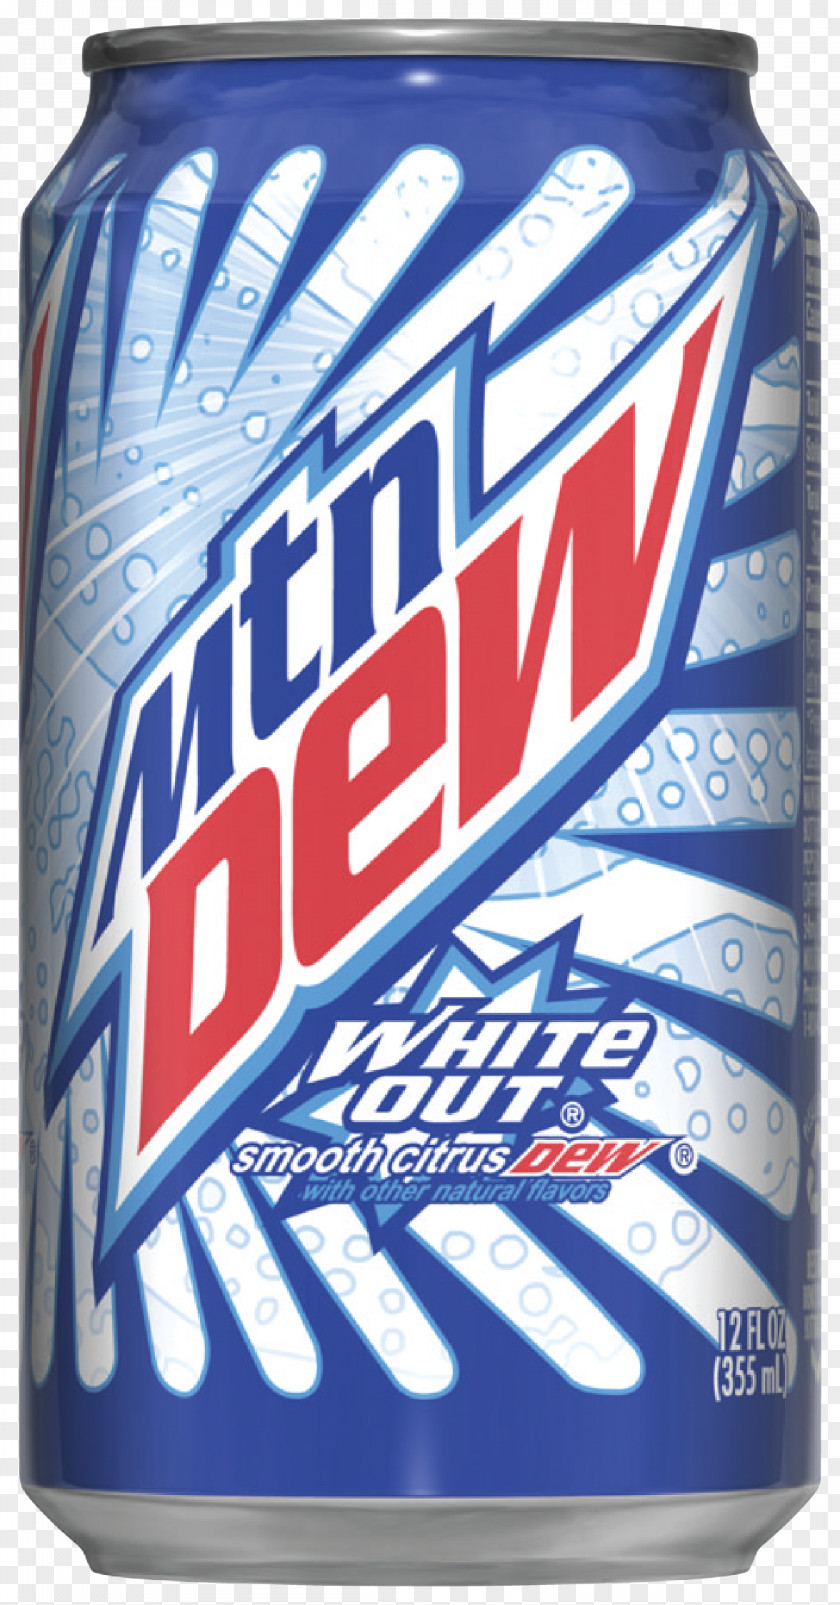 Mountain Dew Fizzy Drinks White Out 12oz. Cans Pack Of 12 Drink Can Flavor PNG